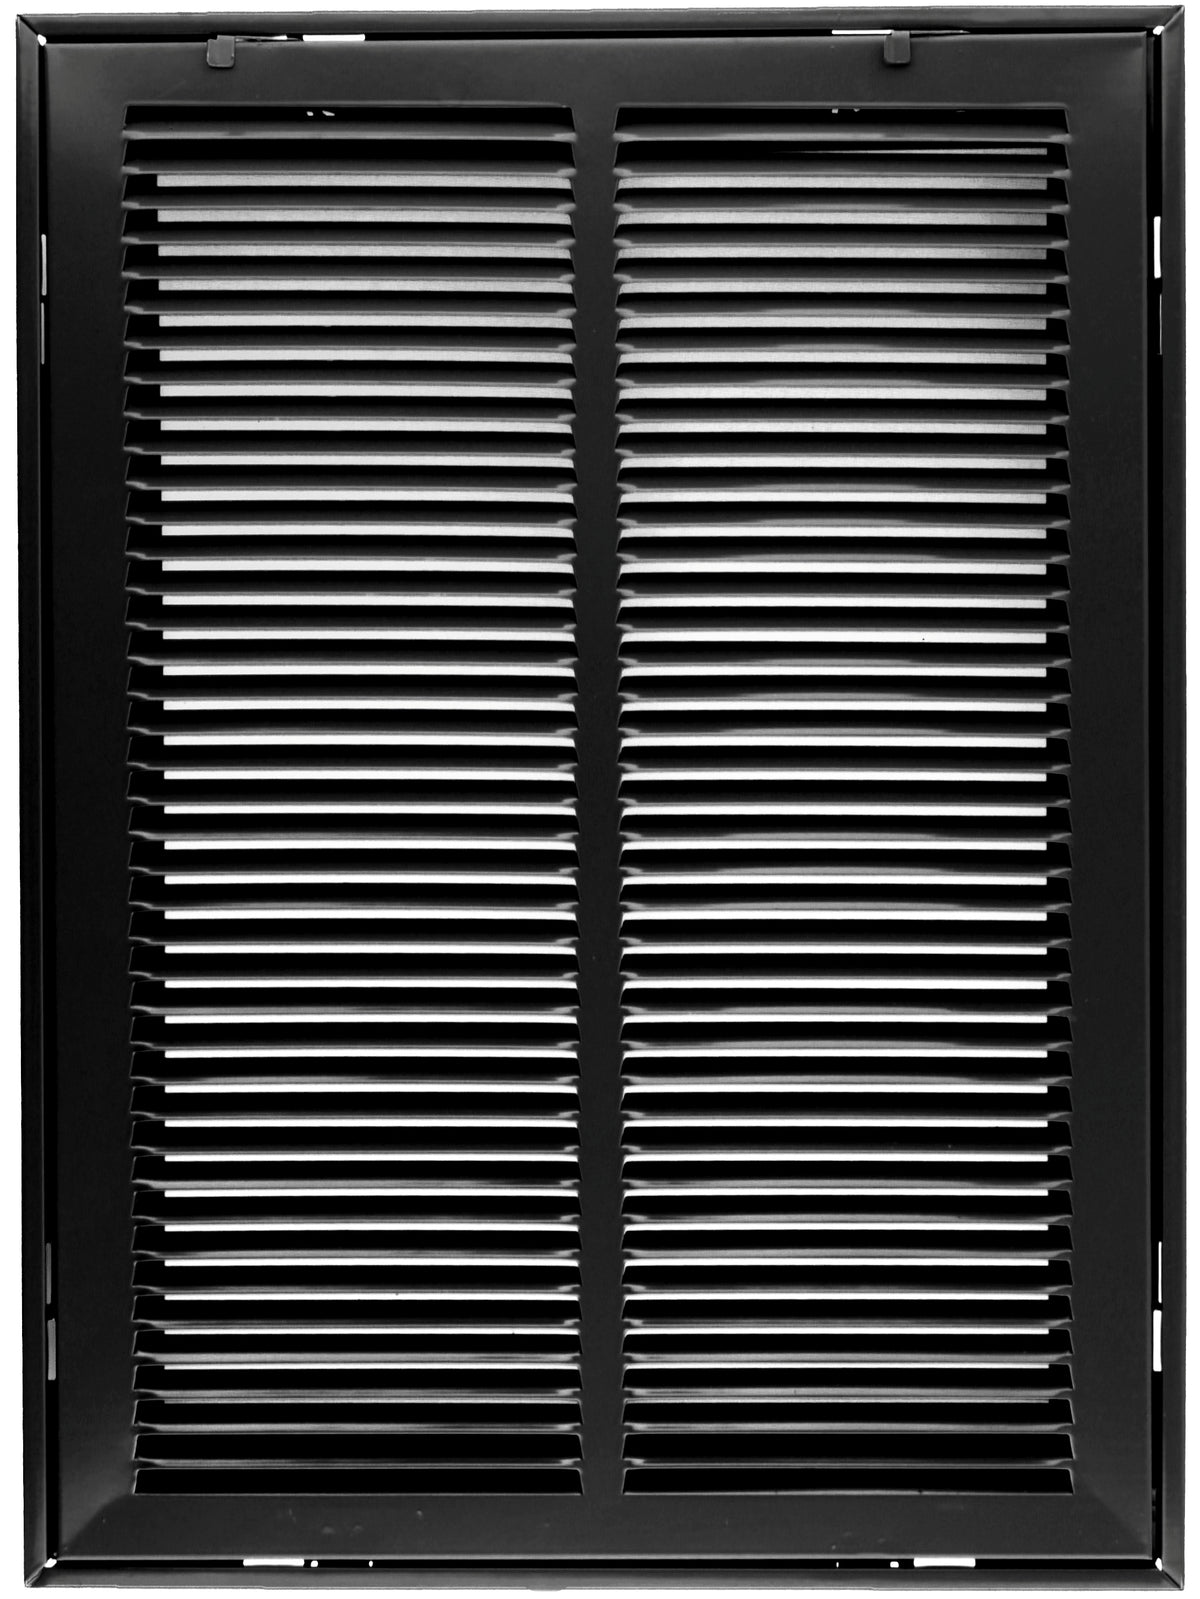 16&quot; X 25&quot; Steel Return Air Filter Grille for 1&quot; Filter - Removable Frame - Black - [Outer Dimensions: 18 5/8&quot; X 27 5/8&quot;]